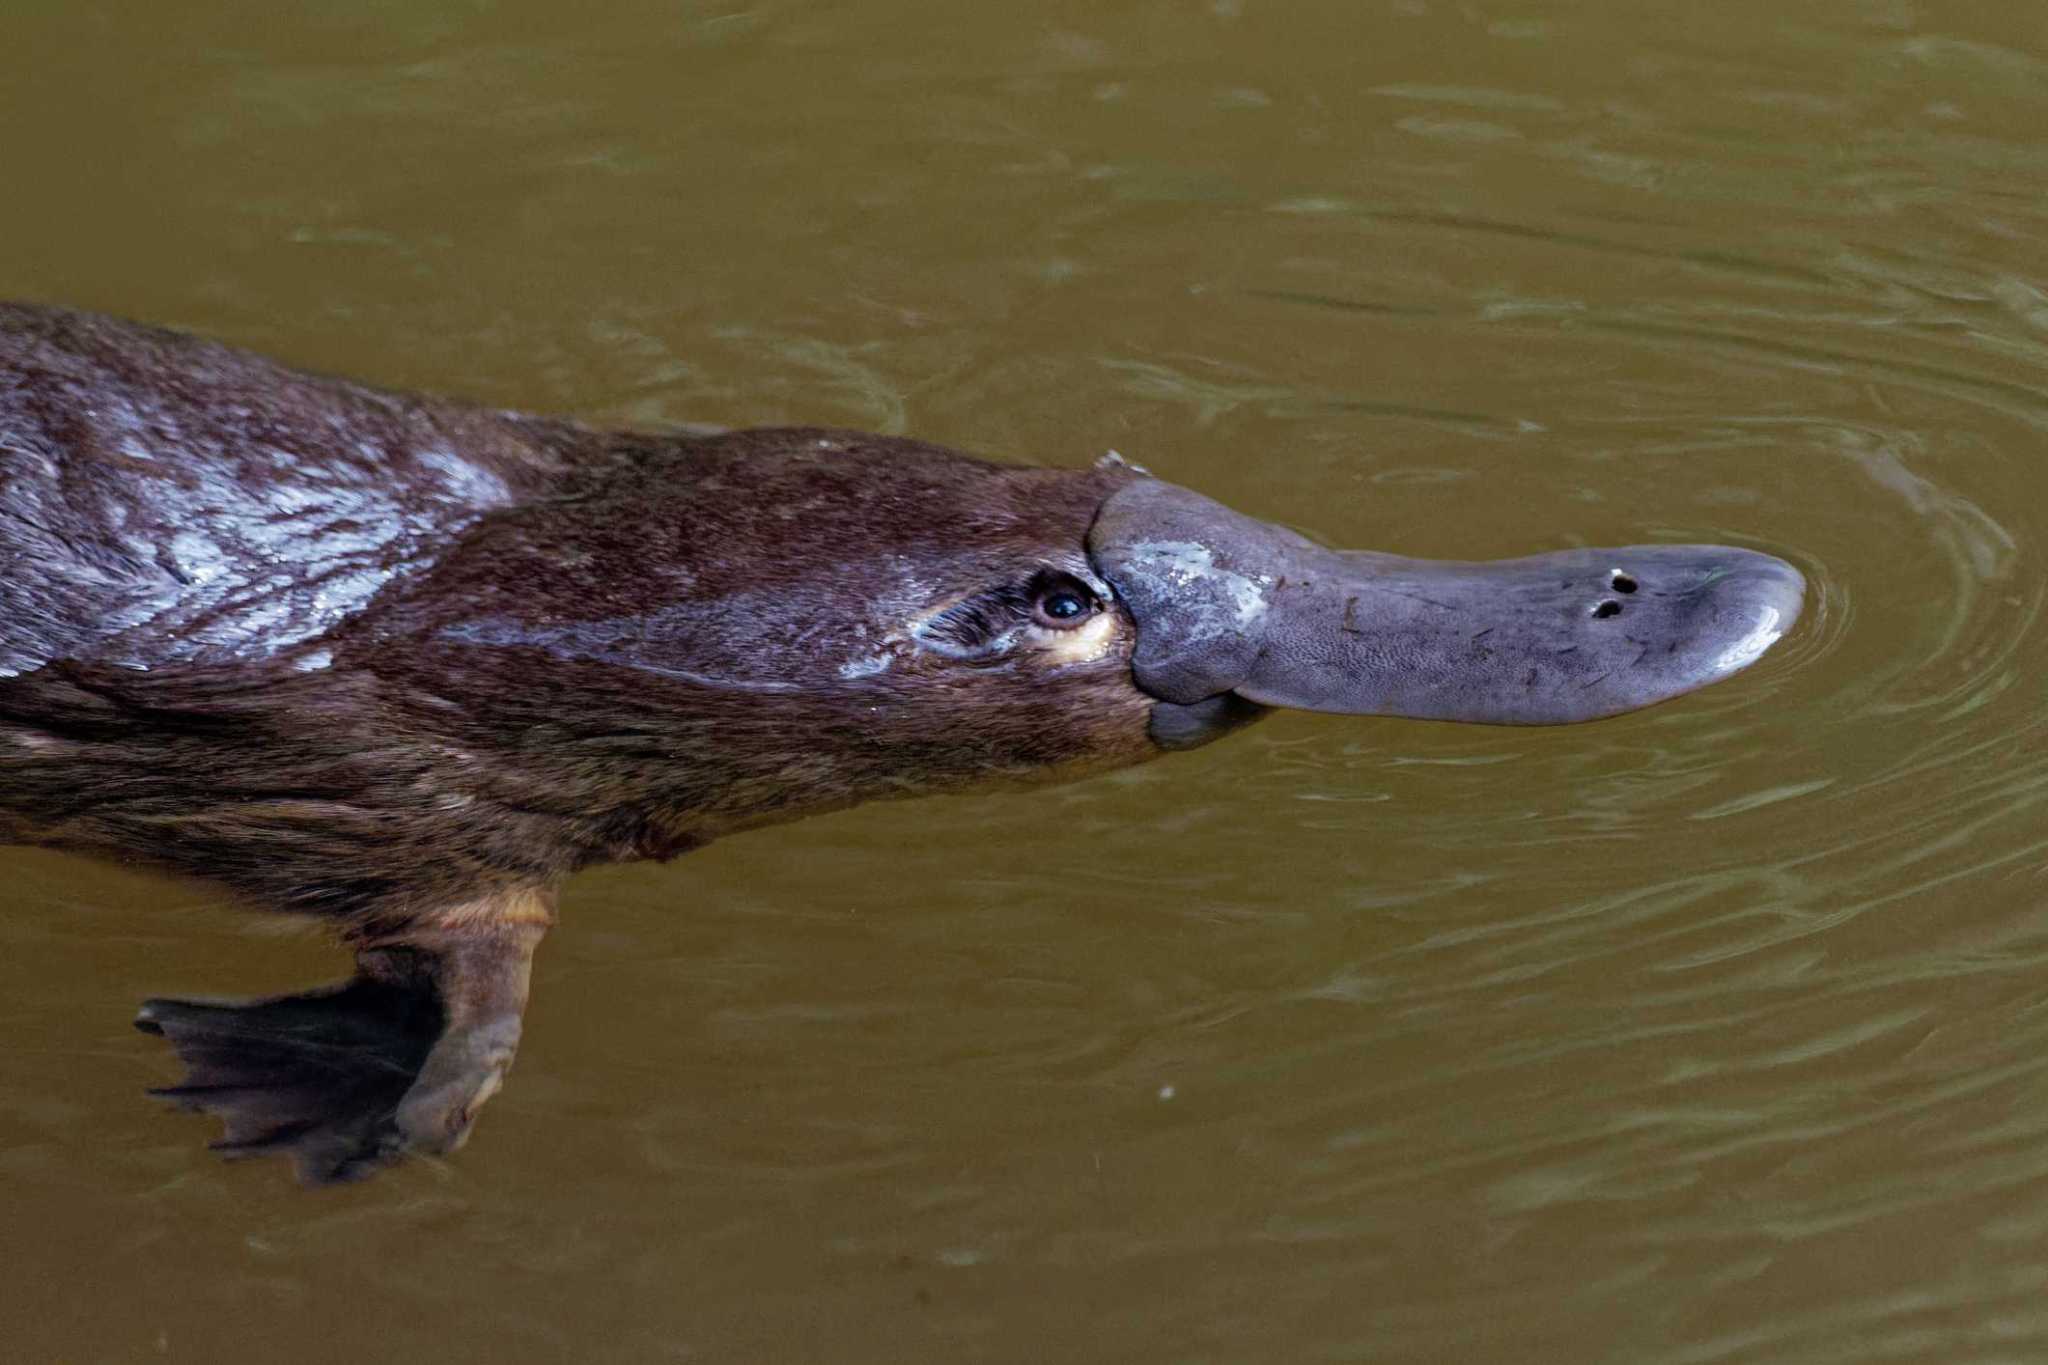 'Urgent need': Australia's drought further hurting declining population of platypuses, researchers say - Thehour.com